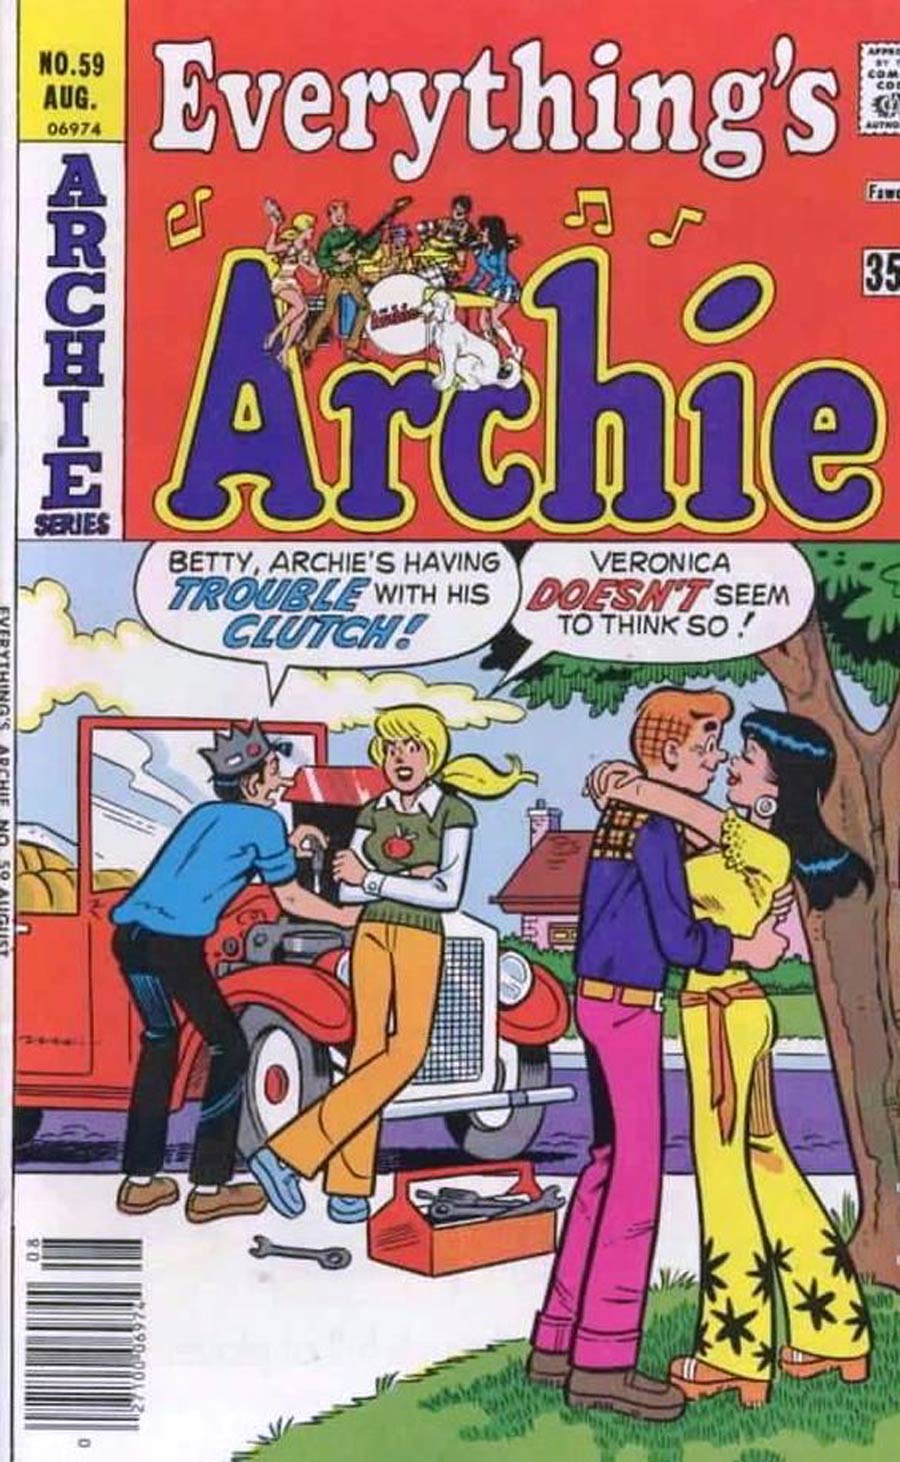 Everythings Archie #59